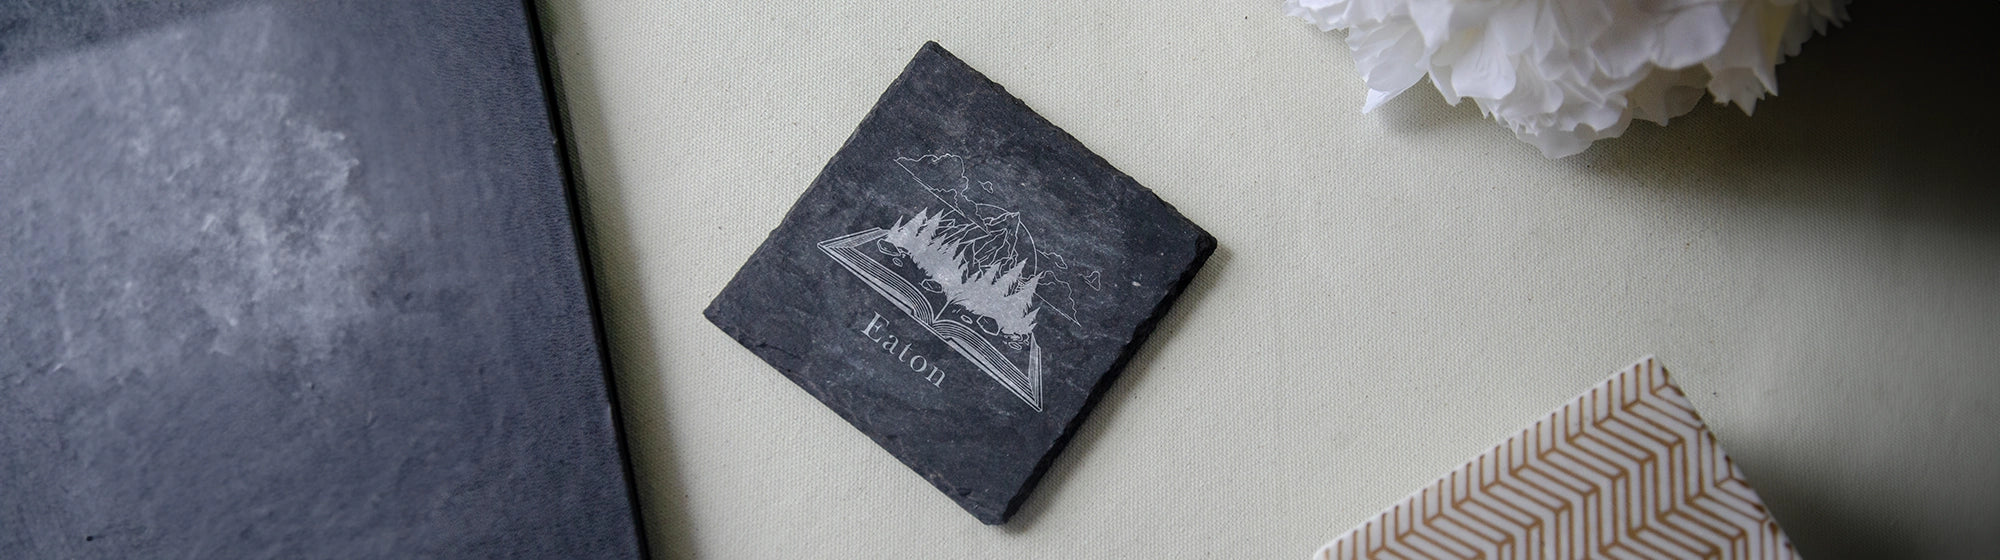 slate drink coaster with personalized engraving of a book on fire